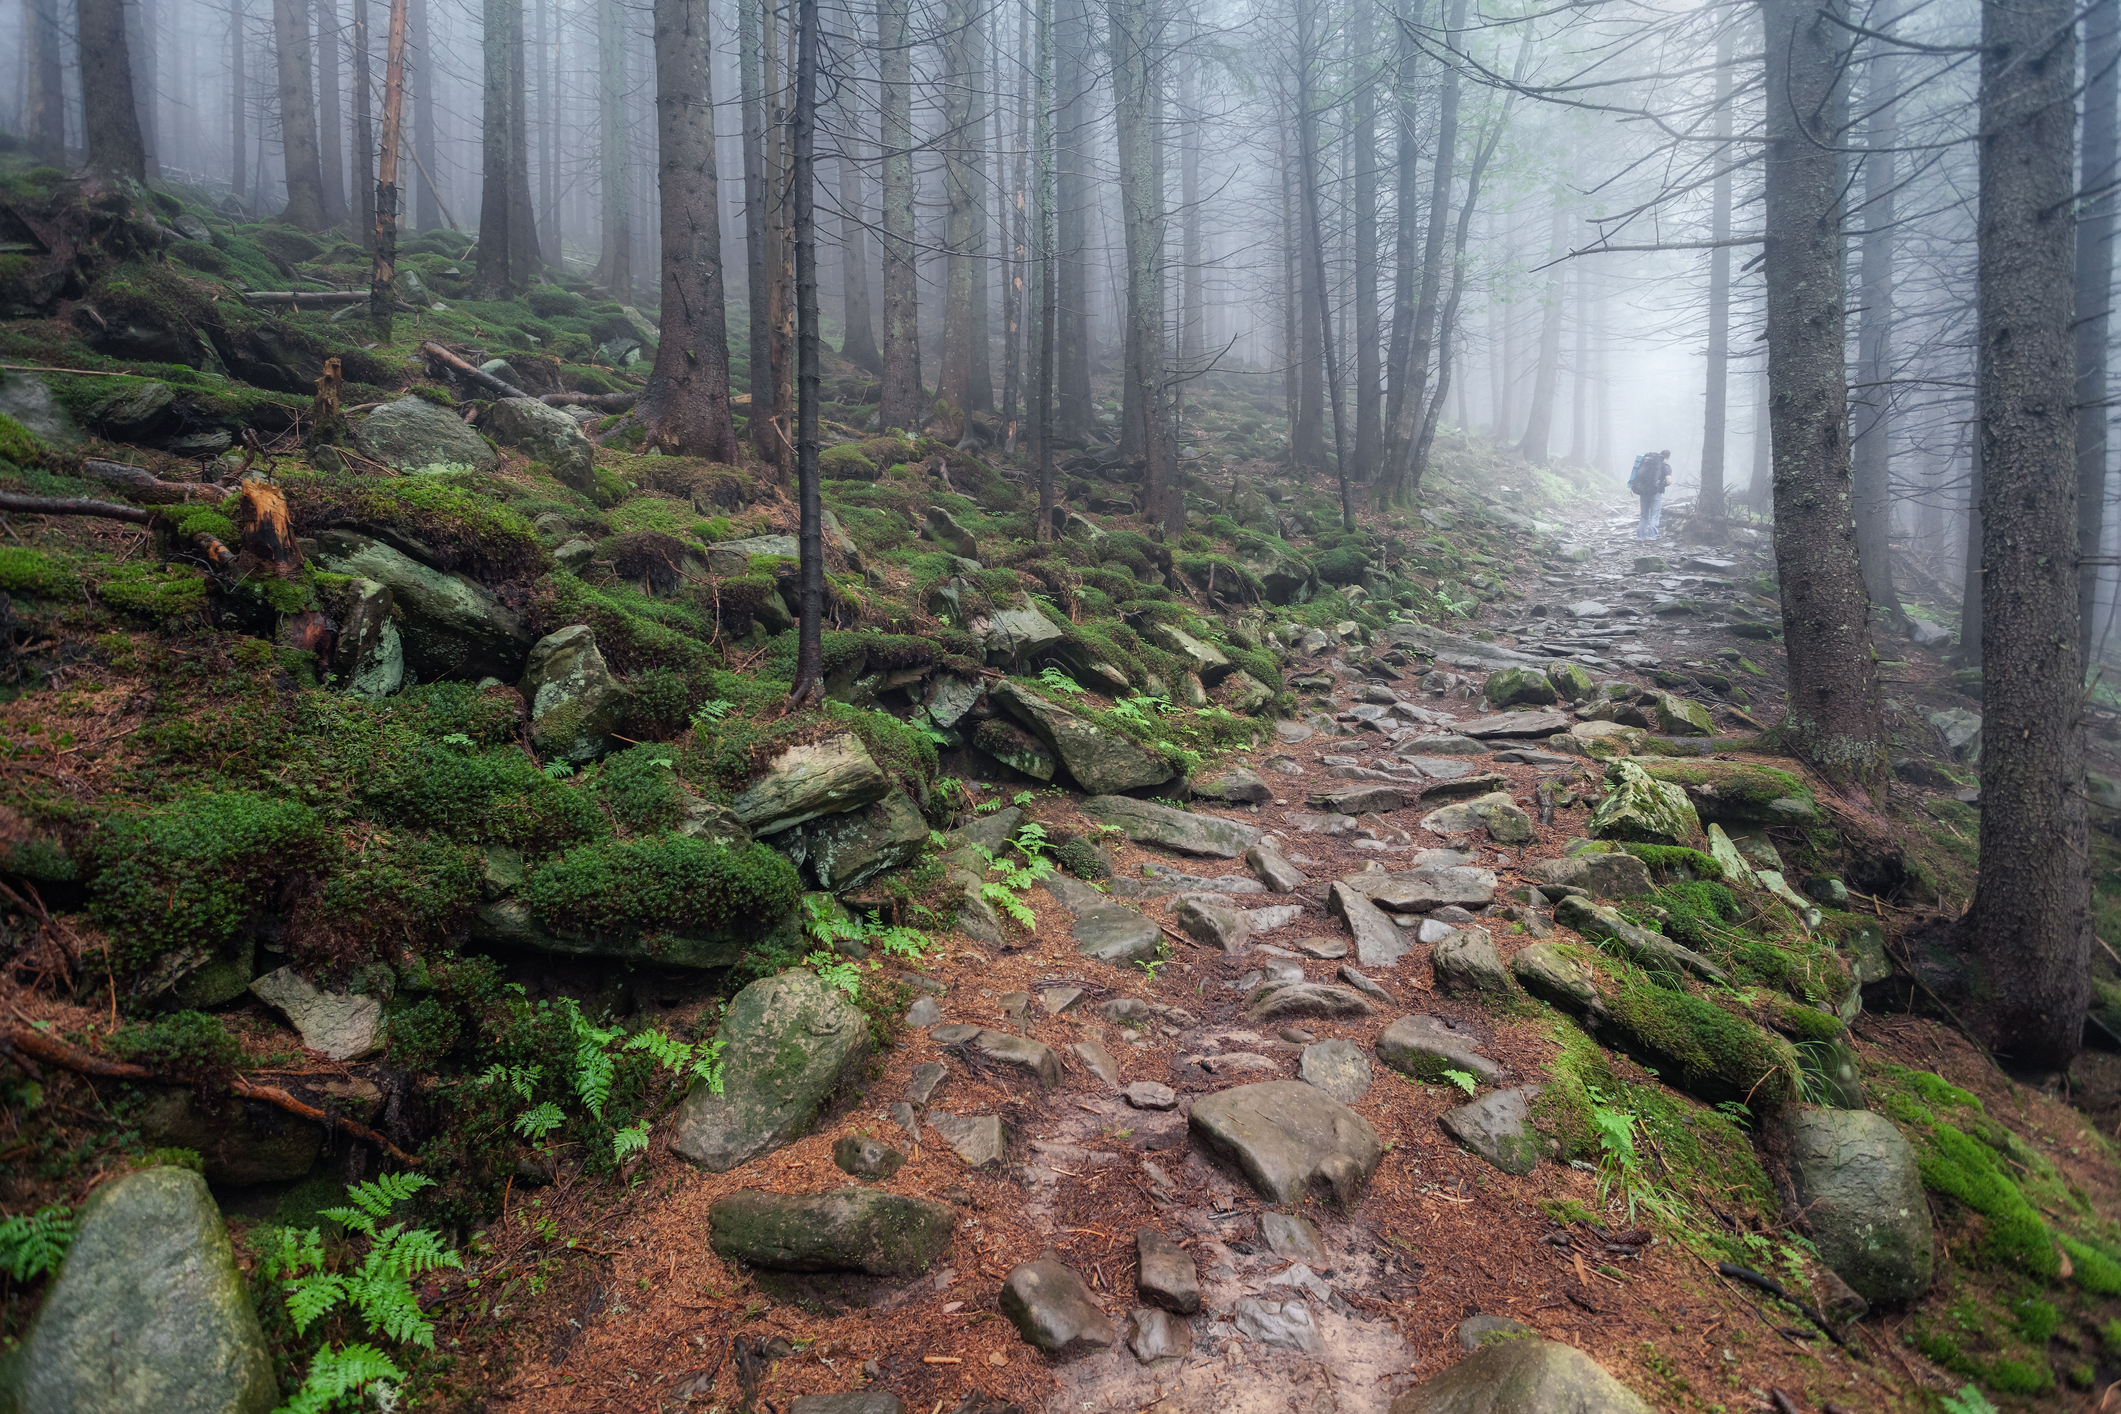 Hiking trail in a foggy forest